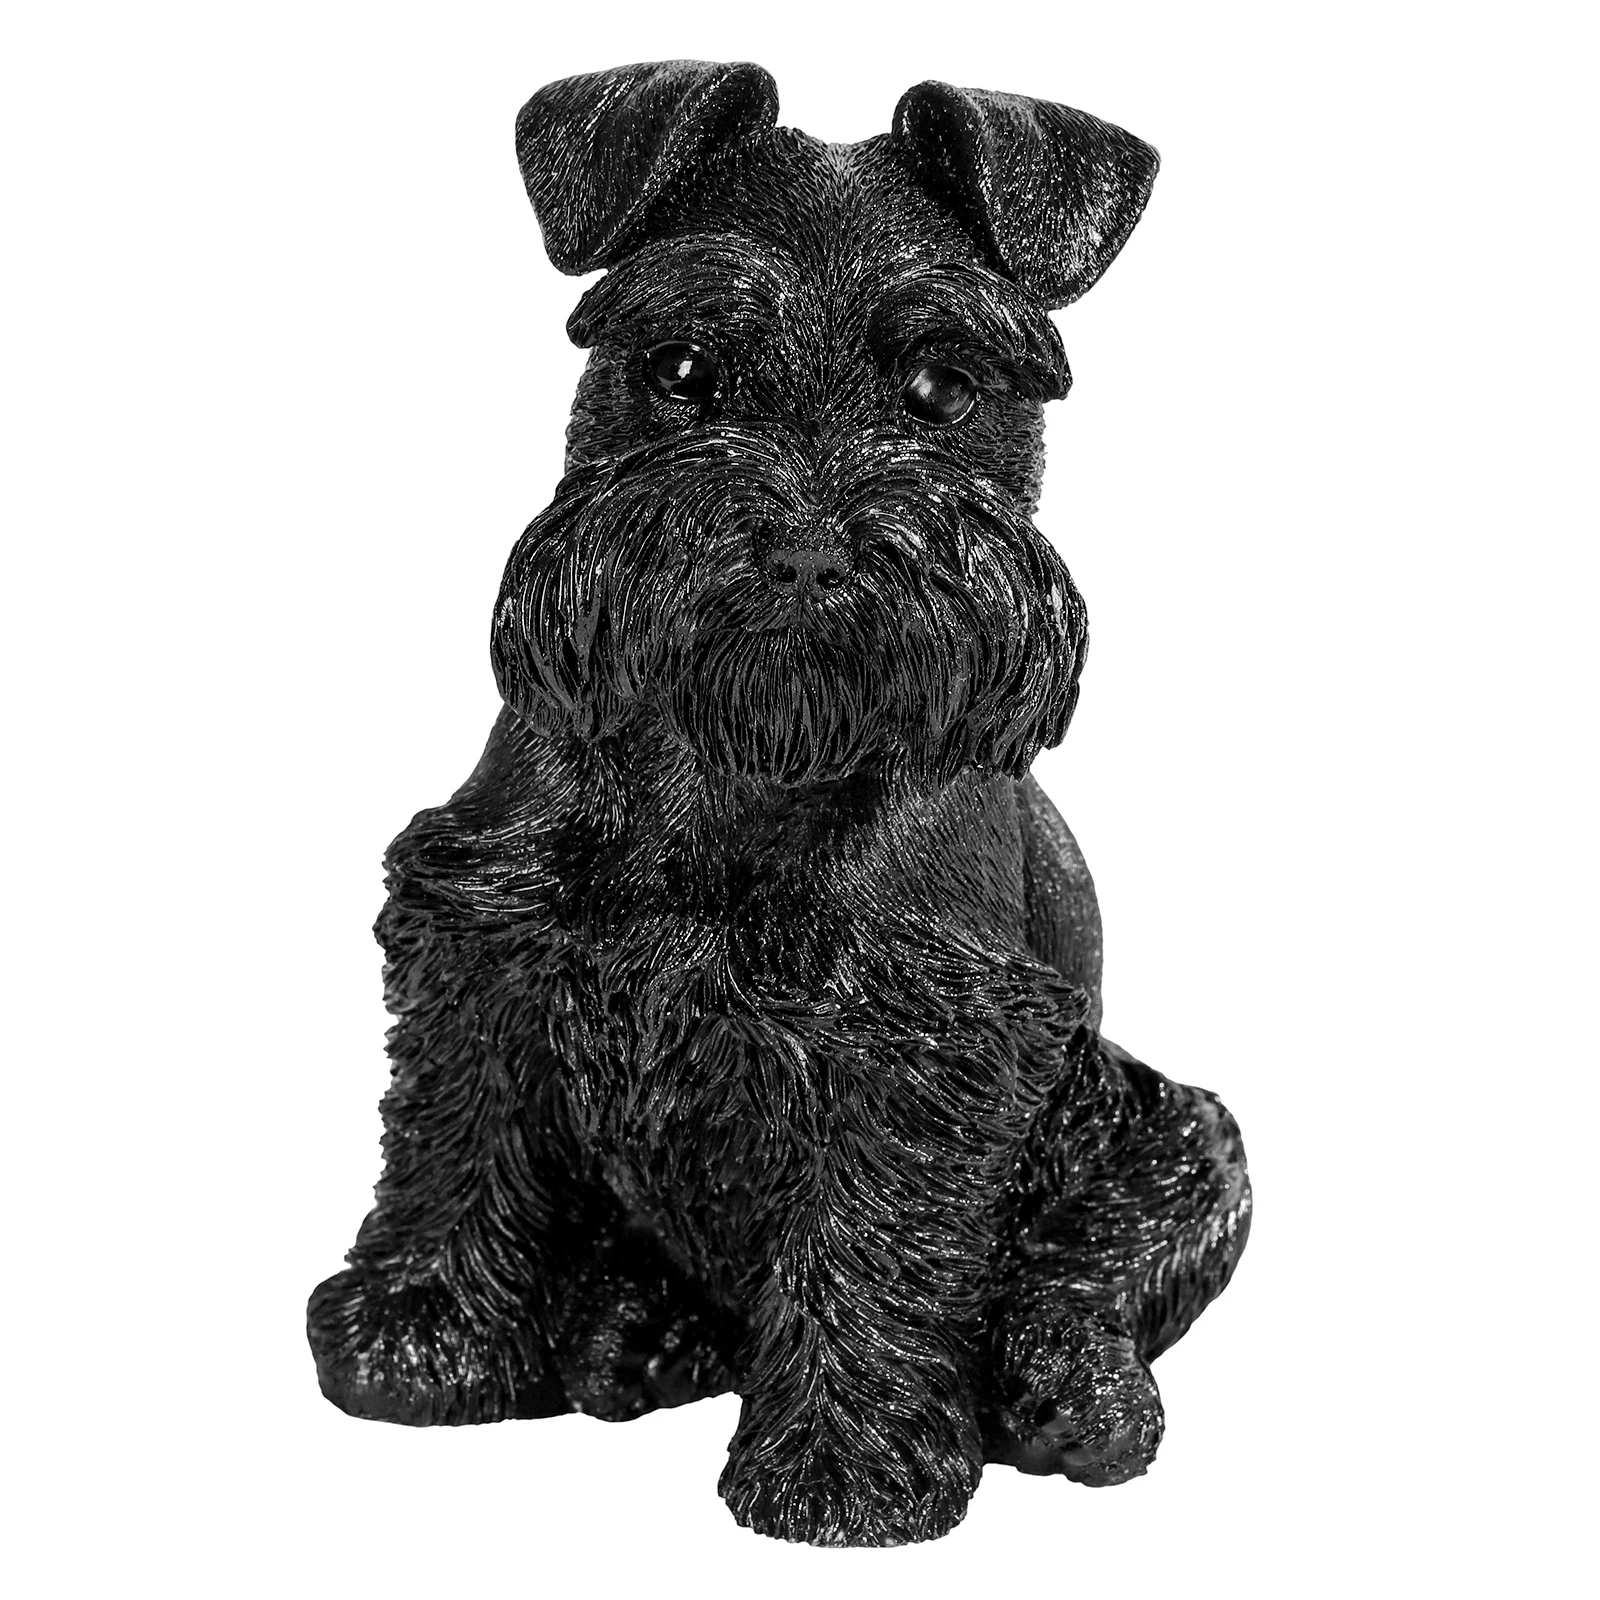 Lovely Mini Schnauzer Puppy Stone Statue Carved Black Obsidian Animal Figurine For Home Decor lovely resin crystal carved owl statue sculpture animals night owl figurine for desktop ornaments office home decor